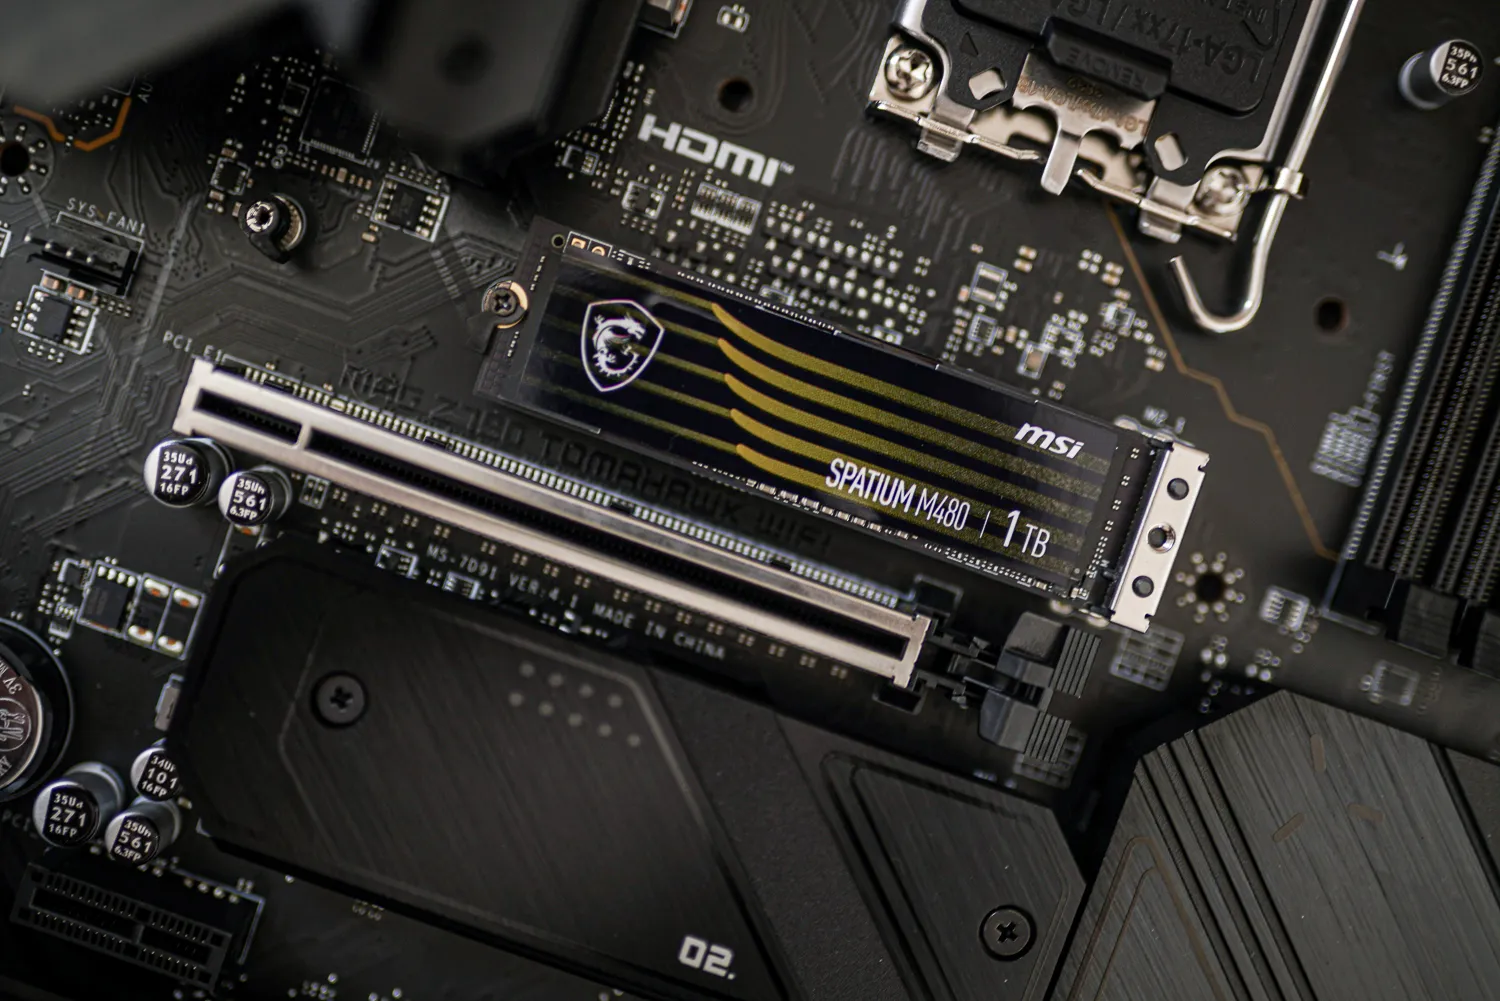 An SSD installed in a PC motherboard